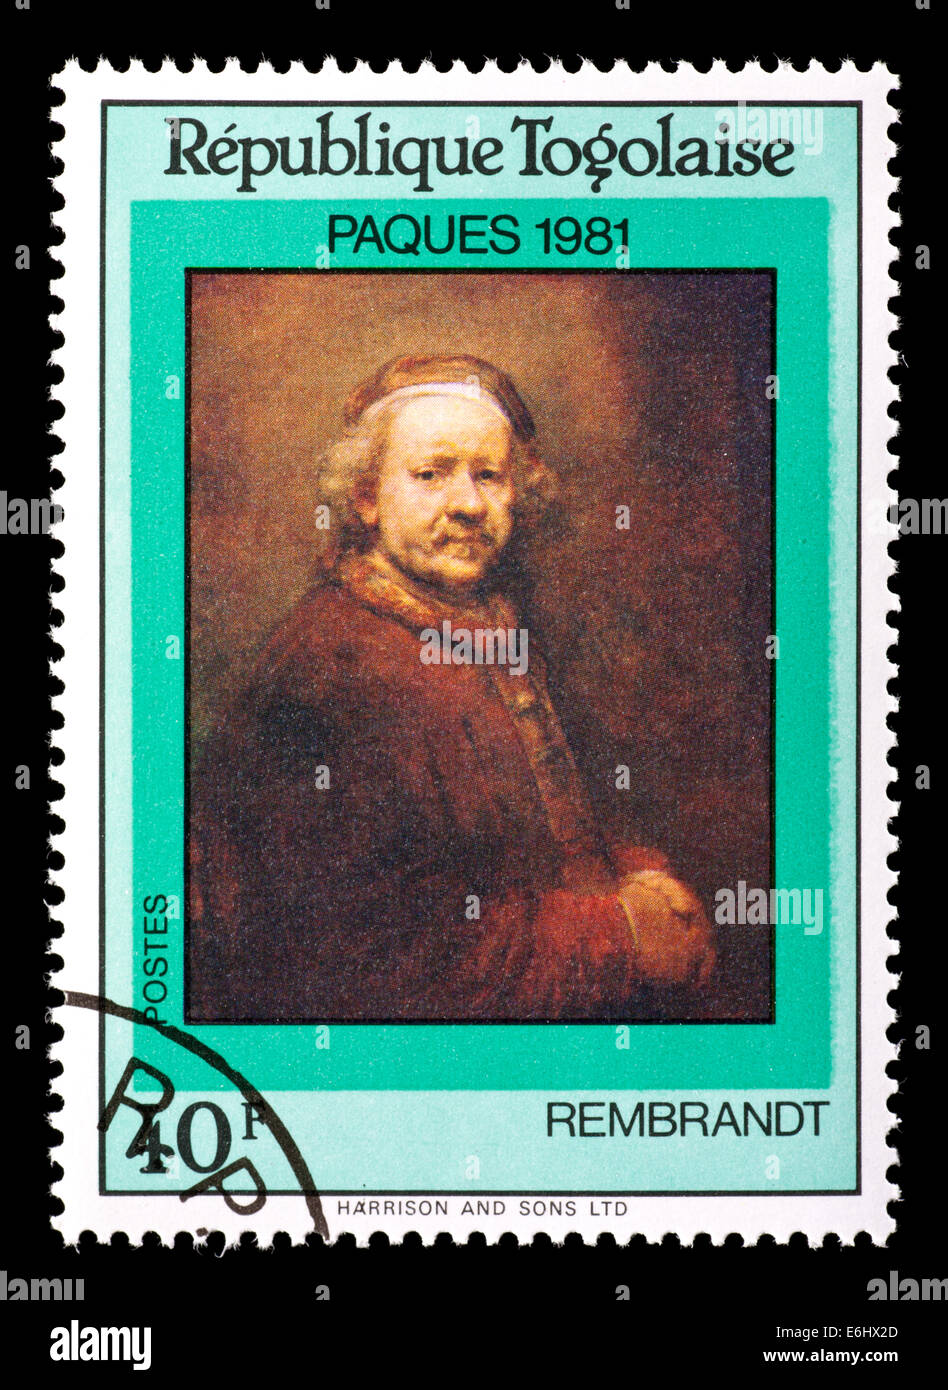 Postage stamp from Togo depicting a self-portrait of Rembrandt. Stock Photo